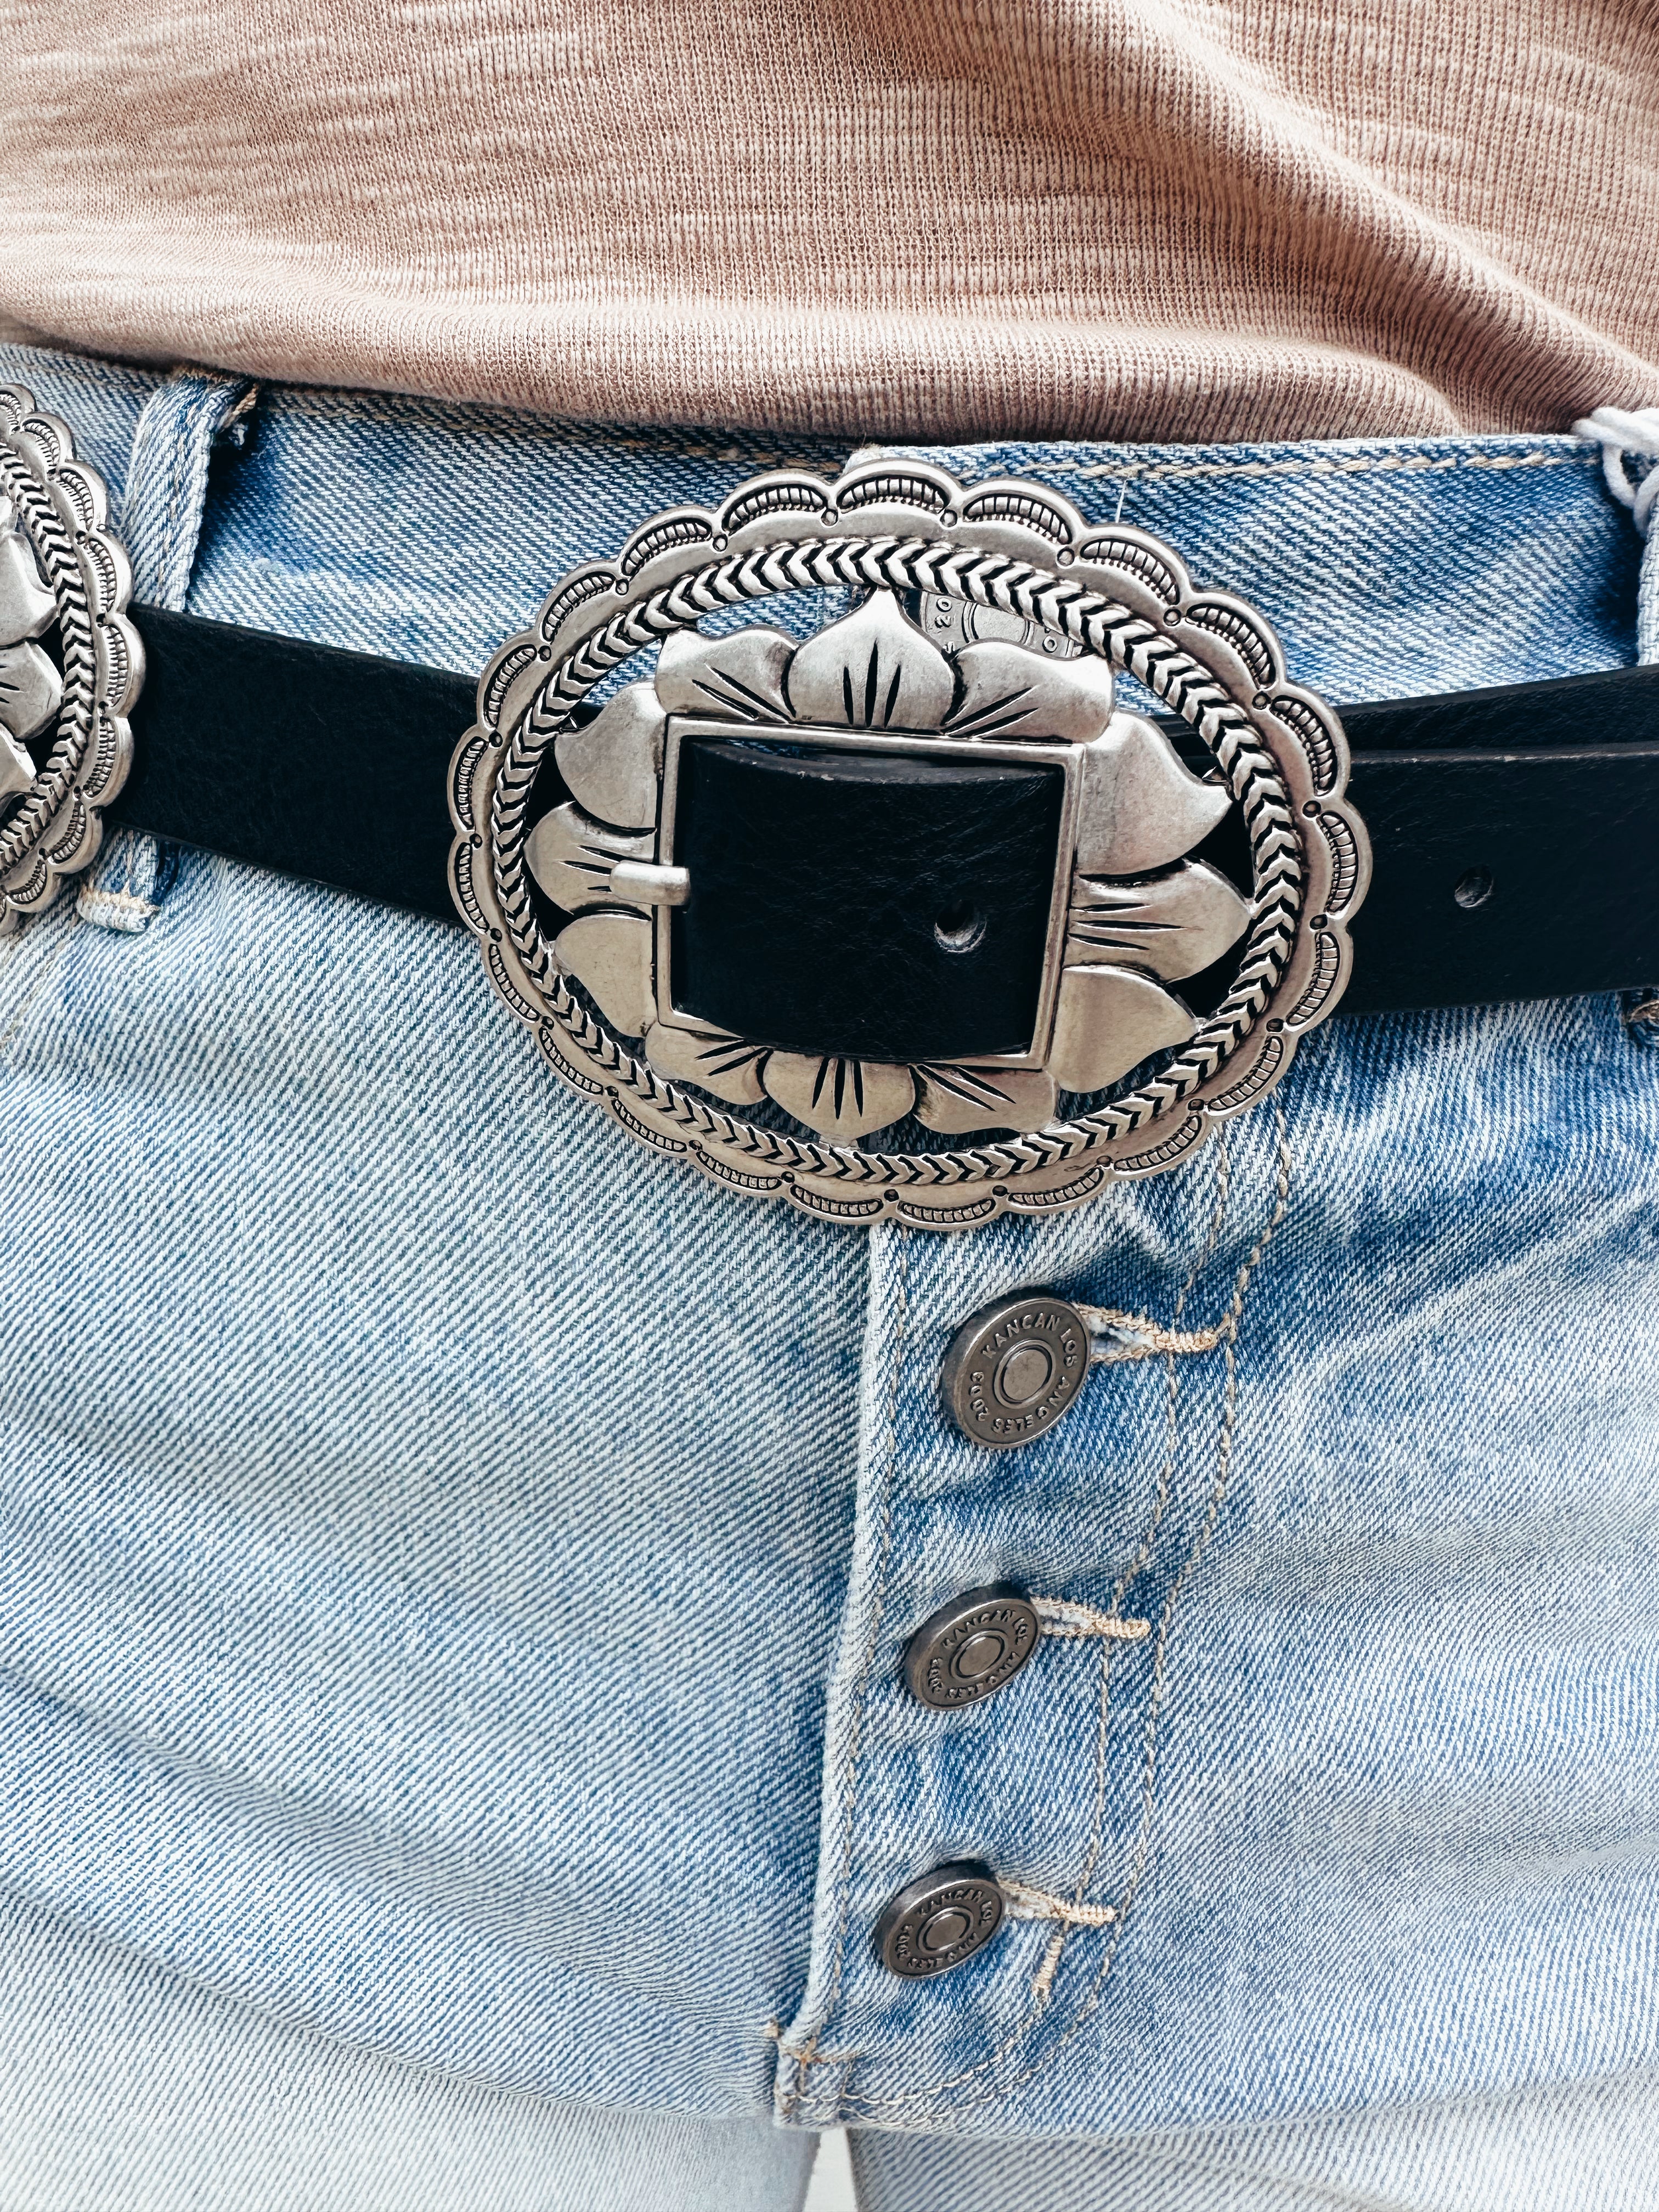 The Makers Belt in Black